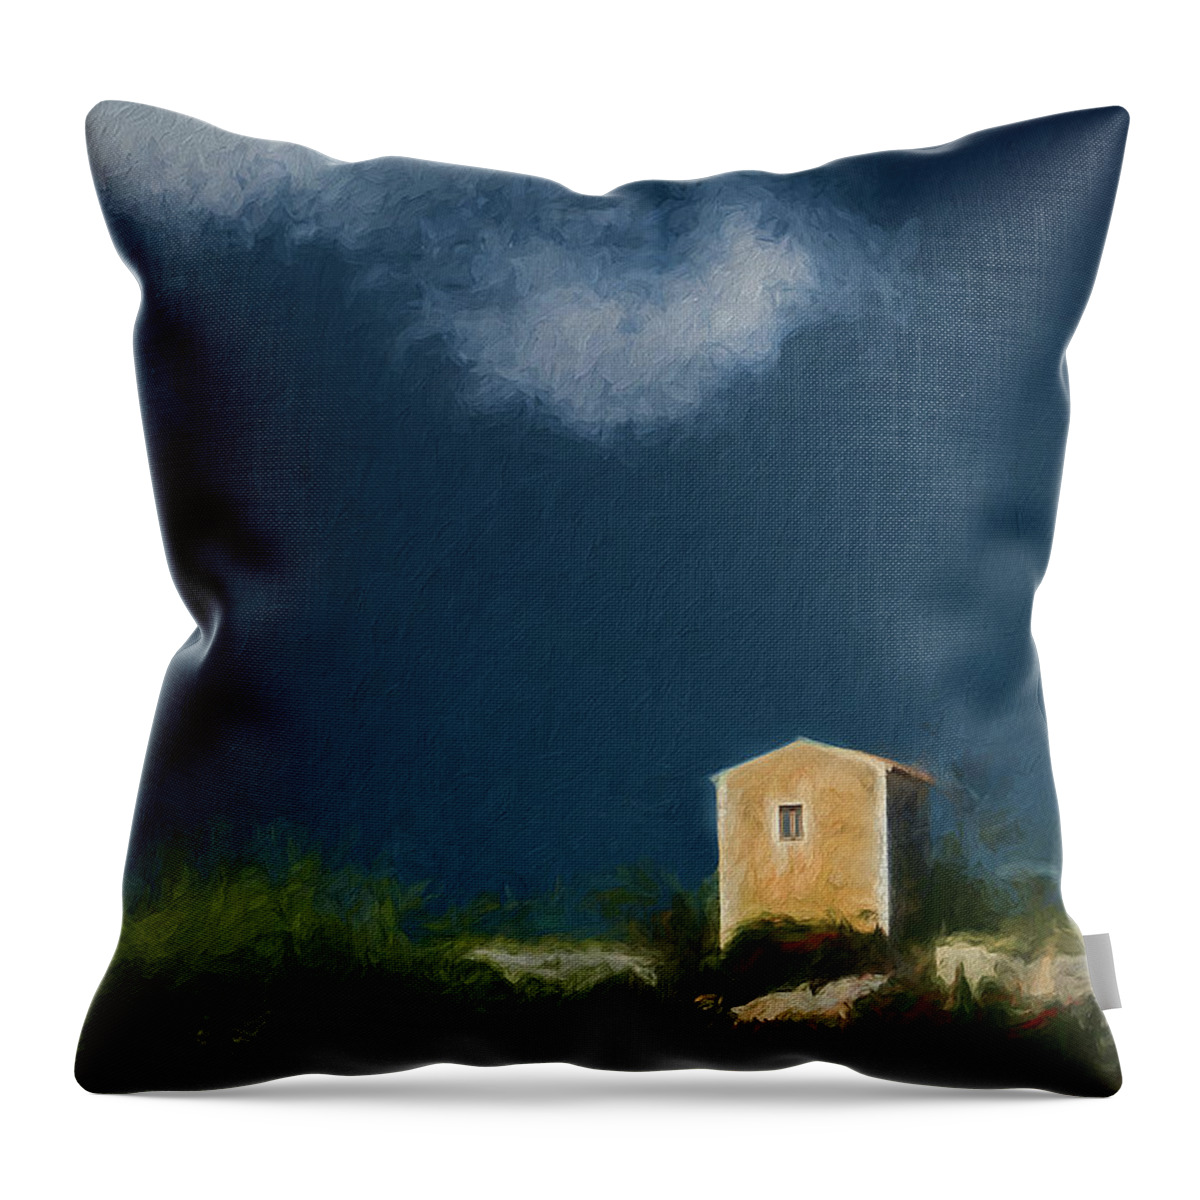 Shack Throw Pillow featuring the photograph The Shack #1 by Mike Nellums